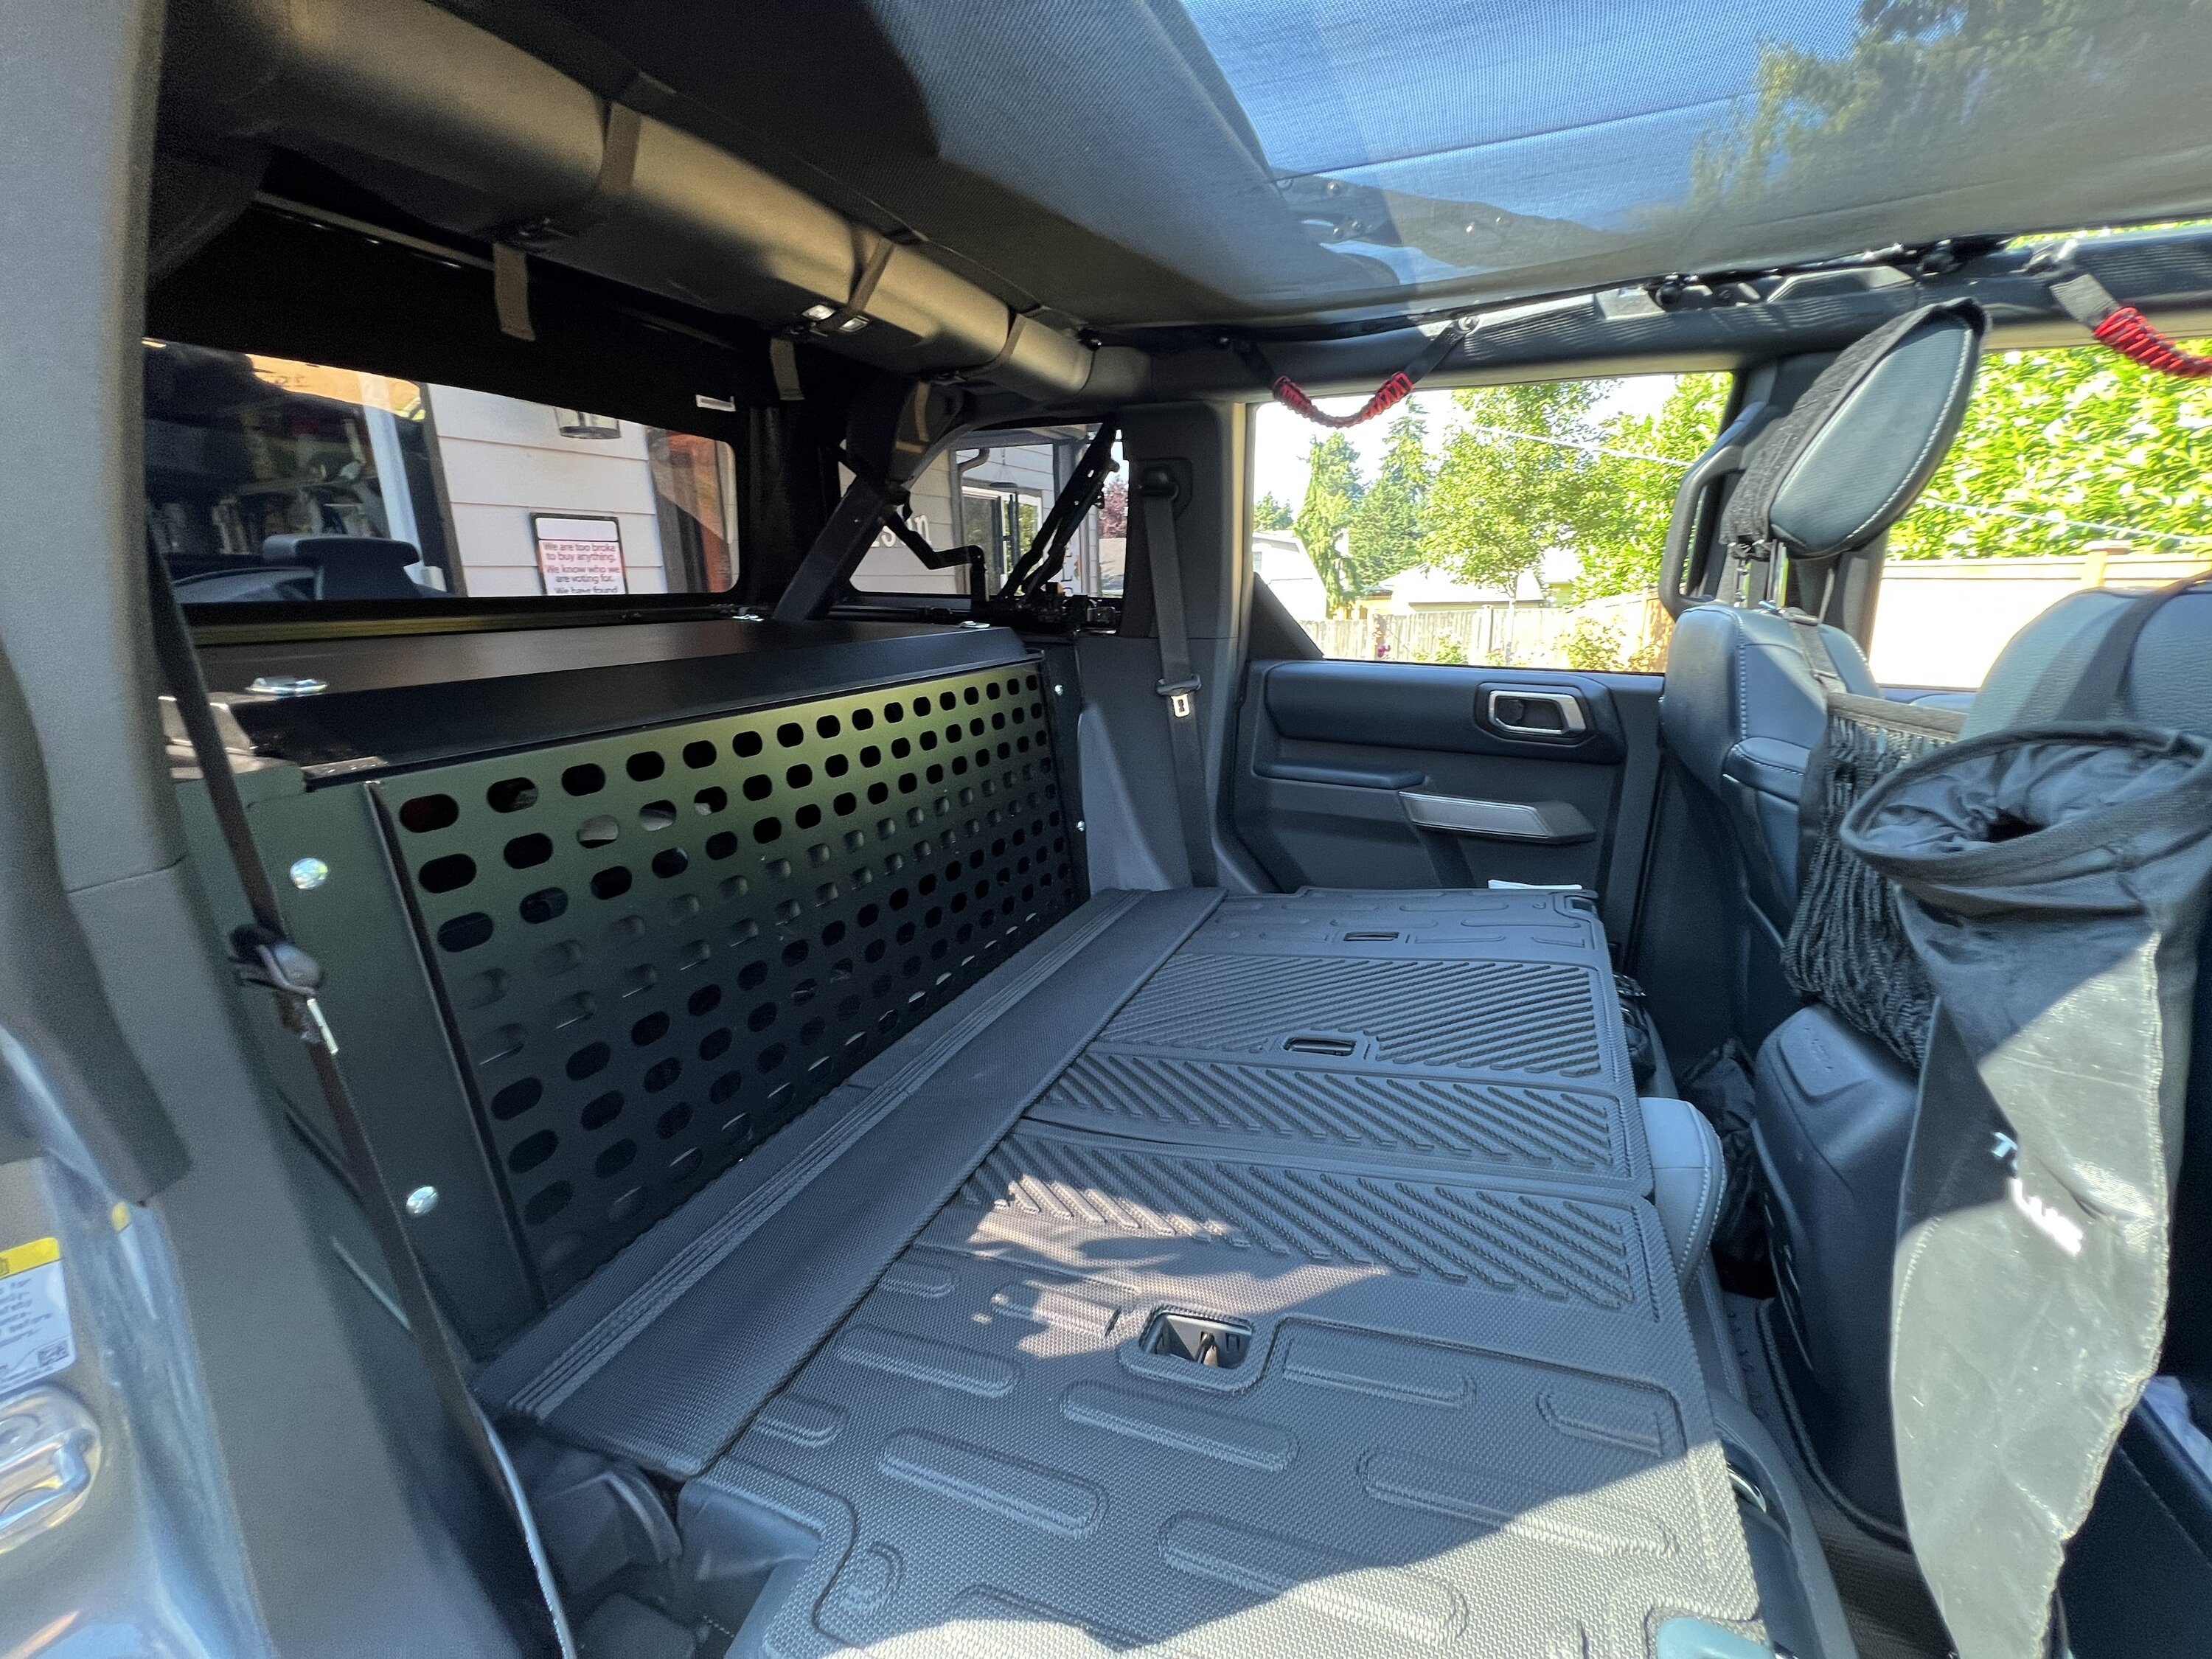 Ford Bronco 7/15/22 - The adventure begins - New 2022 Carbonized Gray Outer Banks 4dr “Lux” CE8DEA7B-EDDA-4721-84A1-D96E6F8A232D